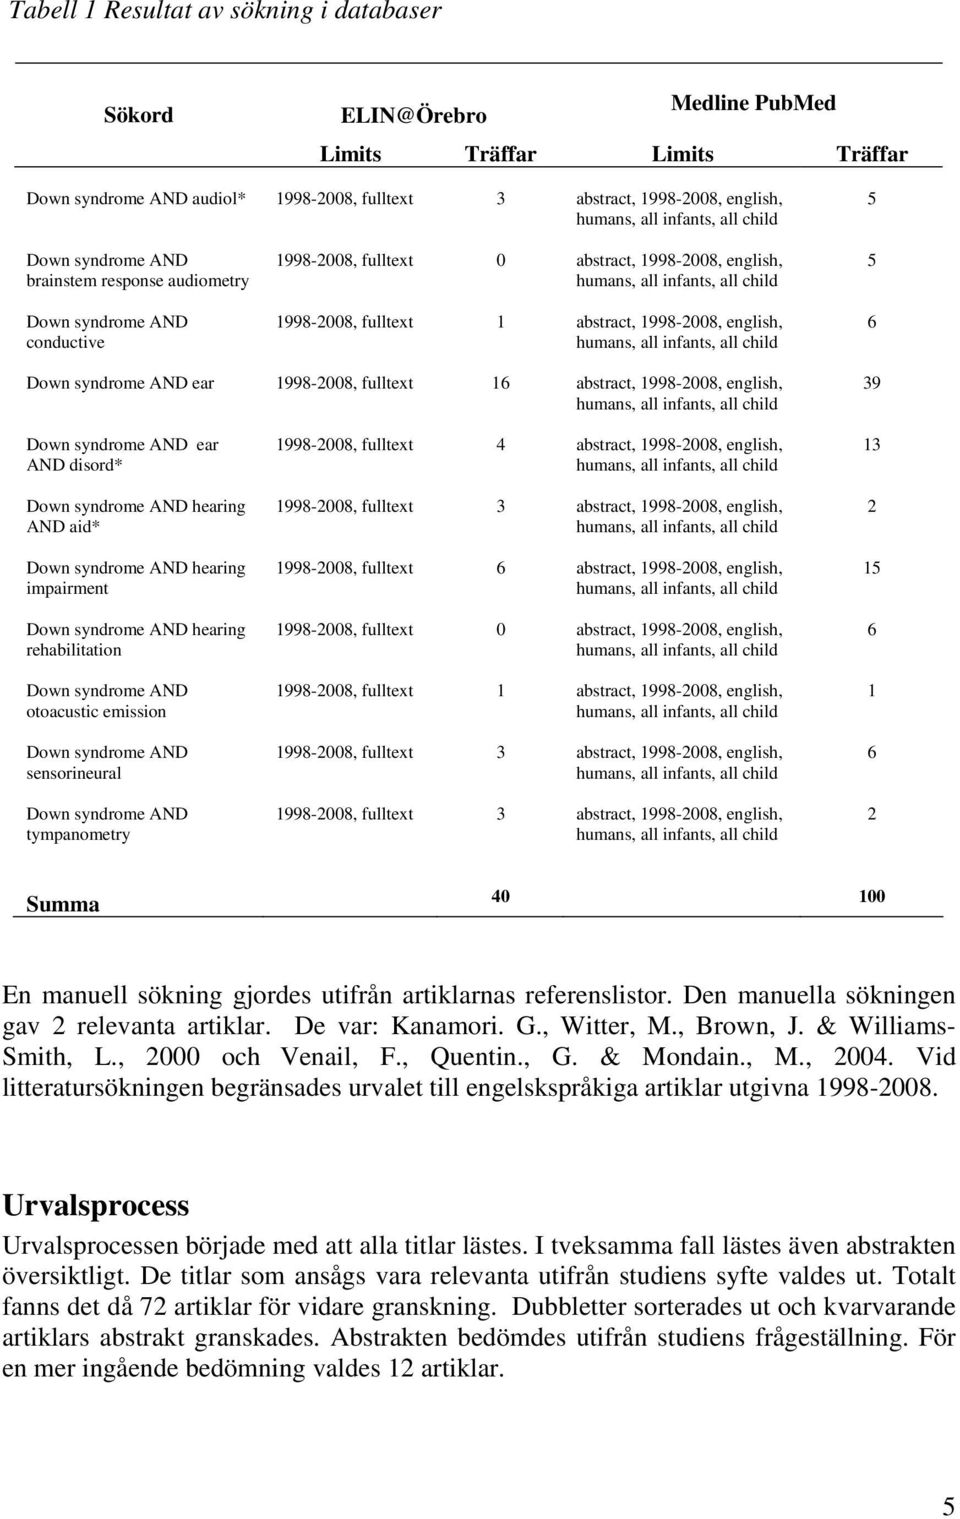 fulltext 1 abstract, 1998-2008, english, humans, all infants, all child 5 6 Down syndrome AND ear 1998-2008, fulltext 16 abstract, 1998-2008, english, humans, all infants, all child 39 Down syndrome